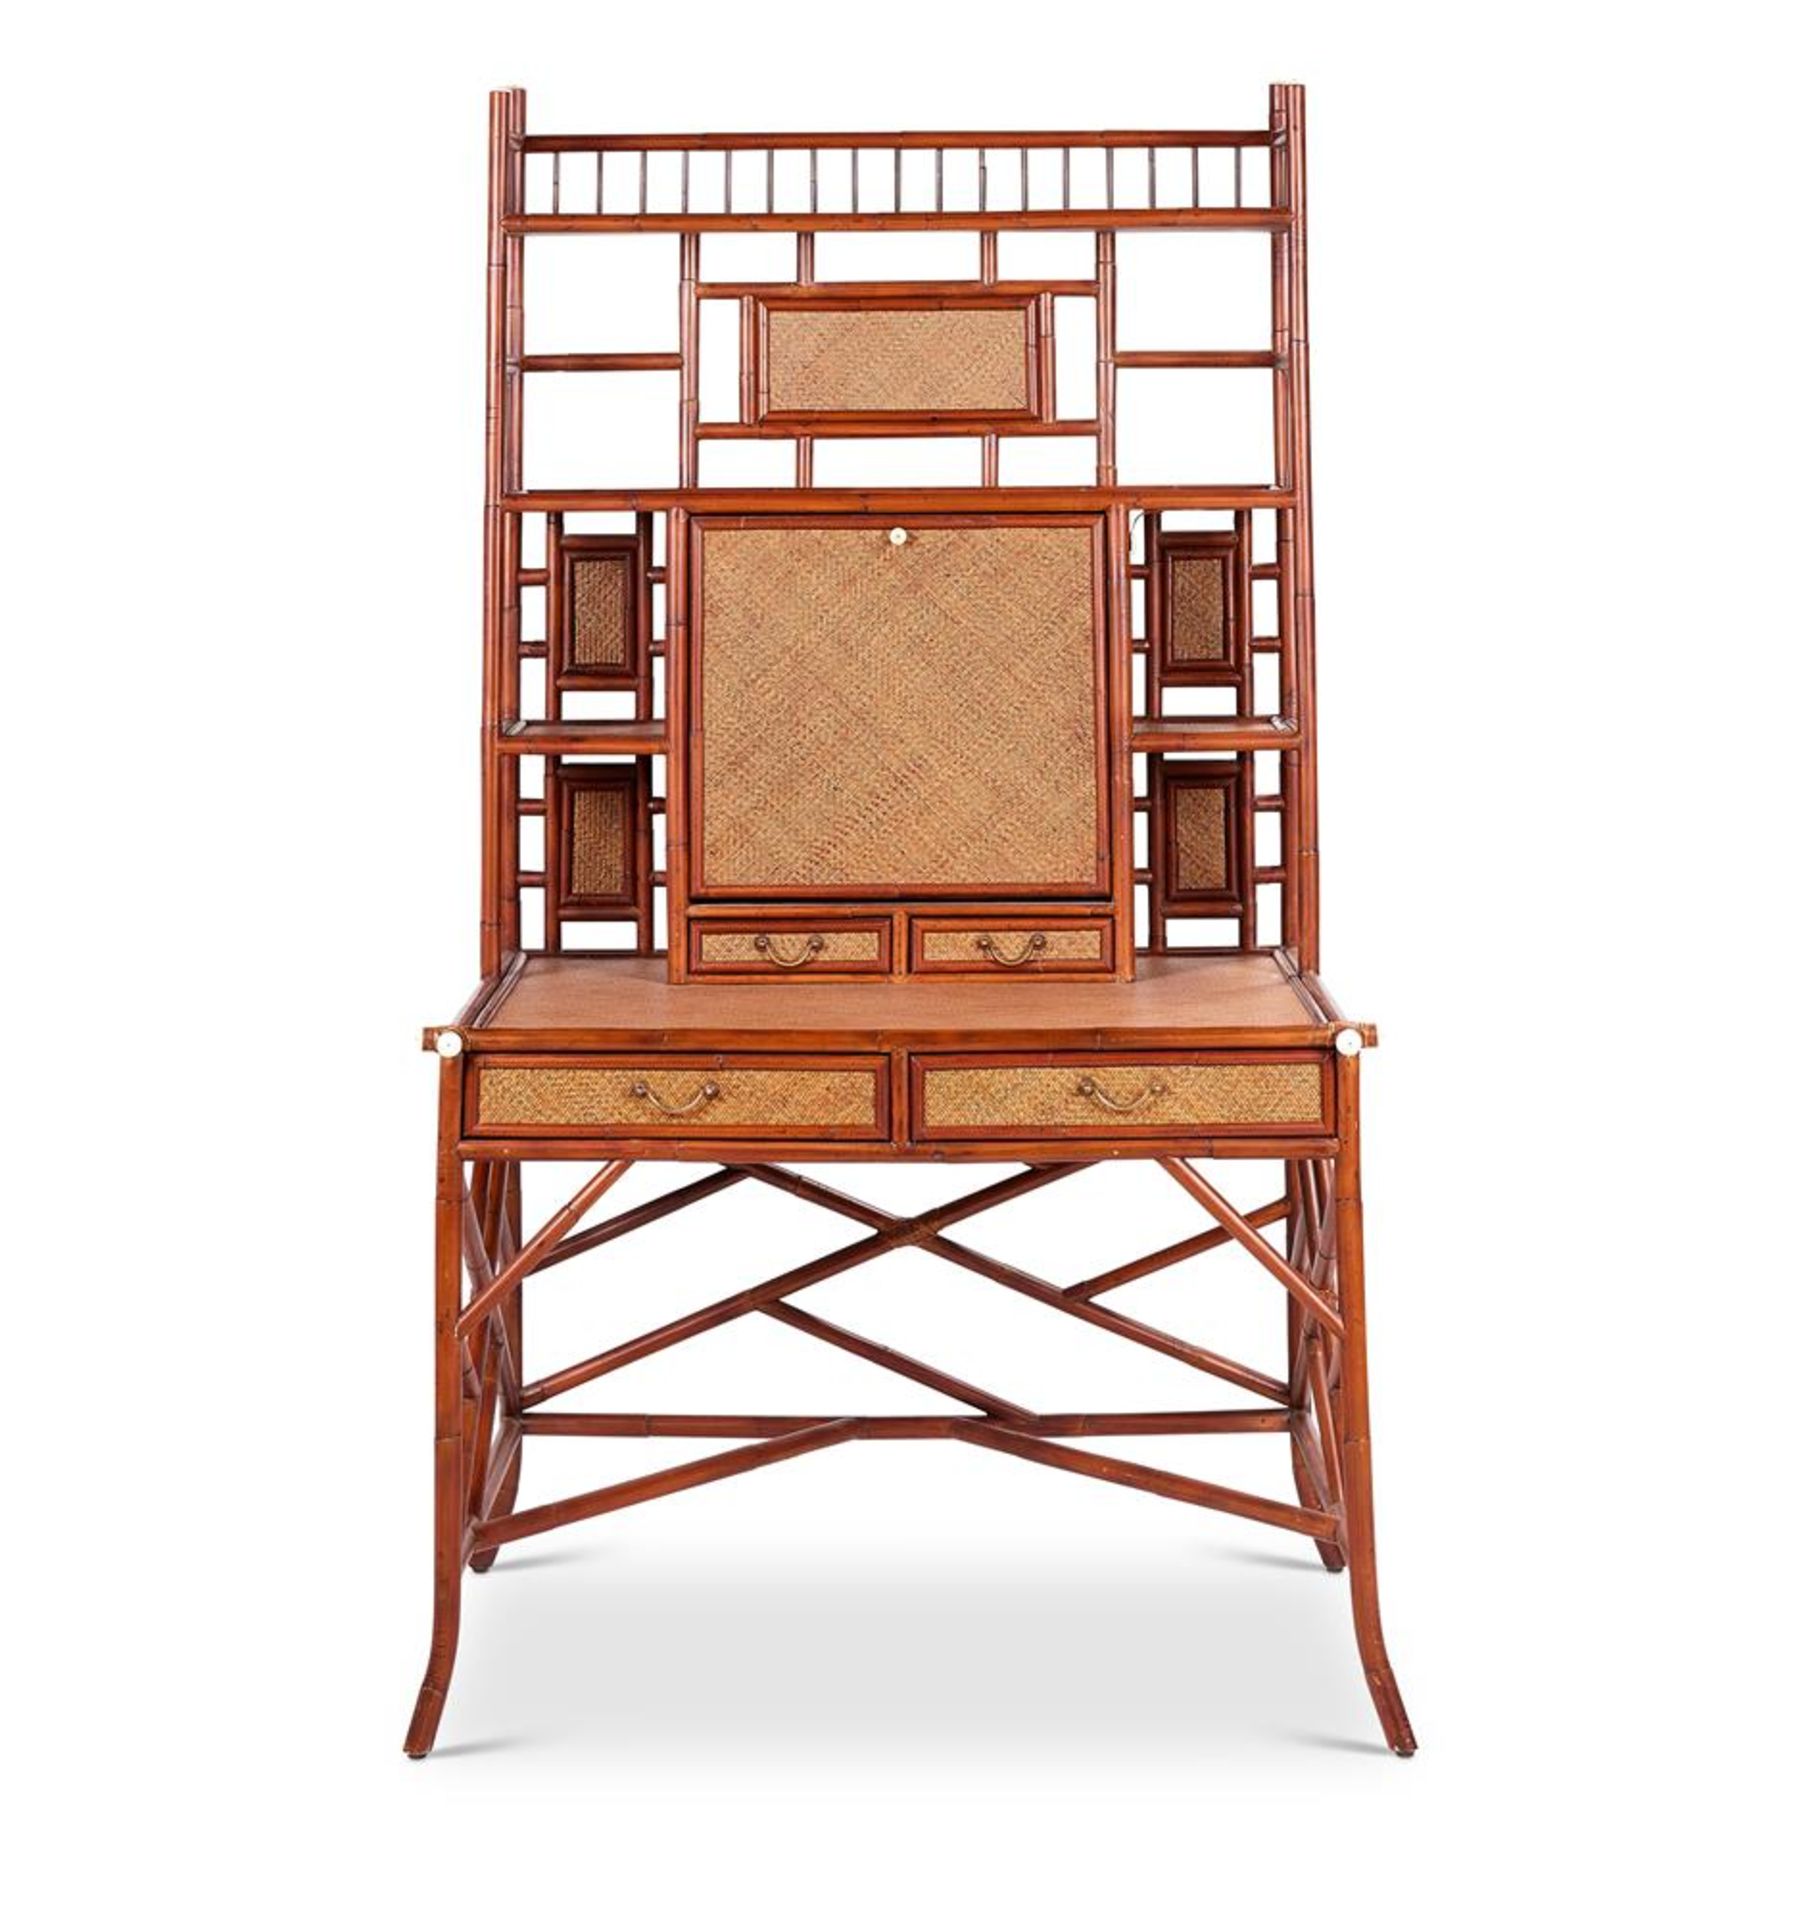 A BAMBOO AND RATTAN SECRETAIRE IN THE NAPOLEON III STYLE MODERN